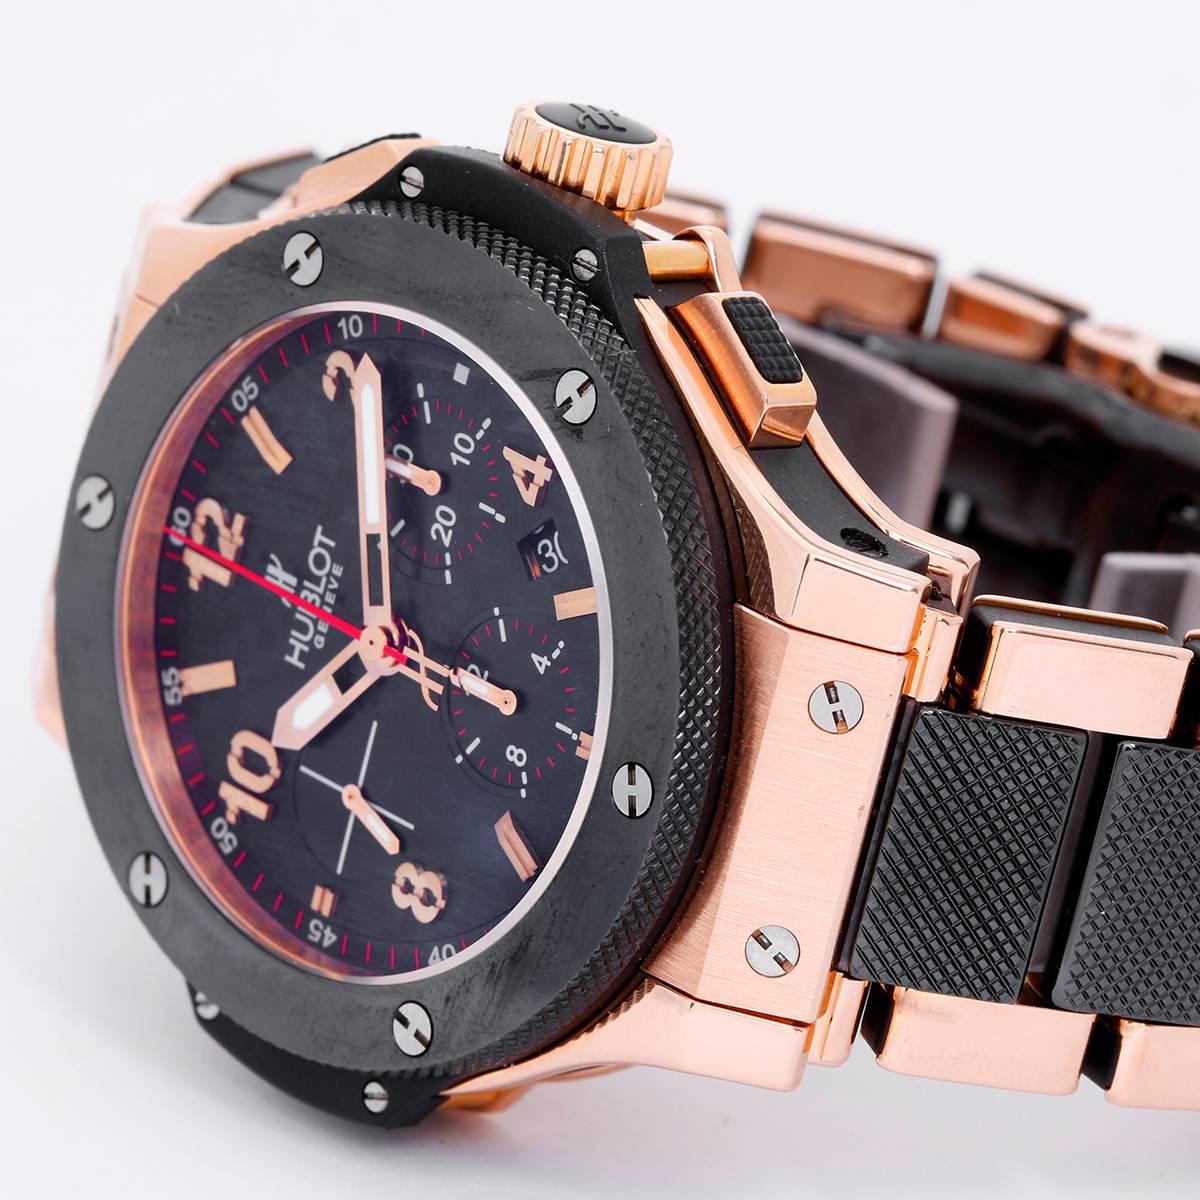 Hublot Big Bang Chronograph 18k Rose Gold Men's Watch 341.PB.131.PB -  Automatic winding; chronograph with date. 	18k rose gold case with black ceramic bezel and exposition back (44mm). 	Black carbon fiber dial with rose gold markers; minutes and